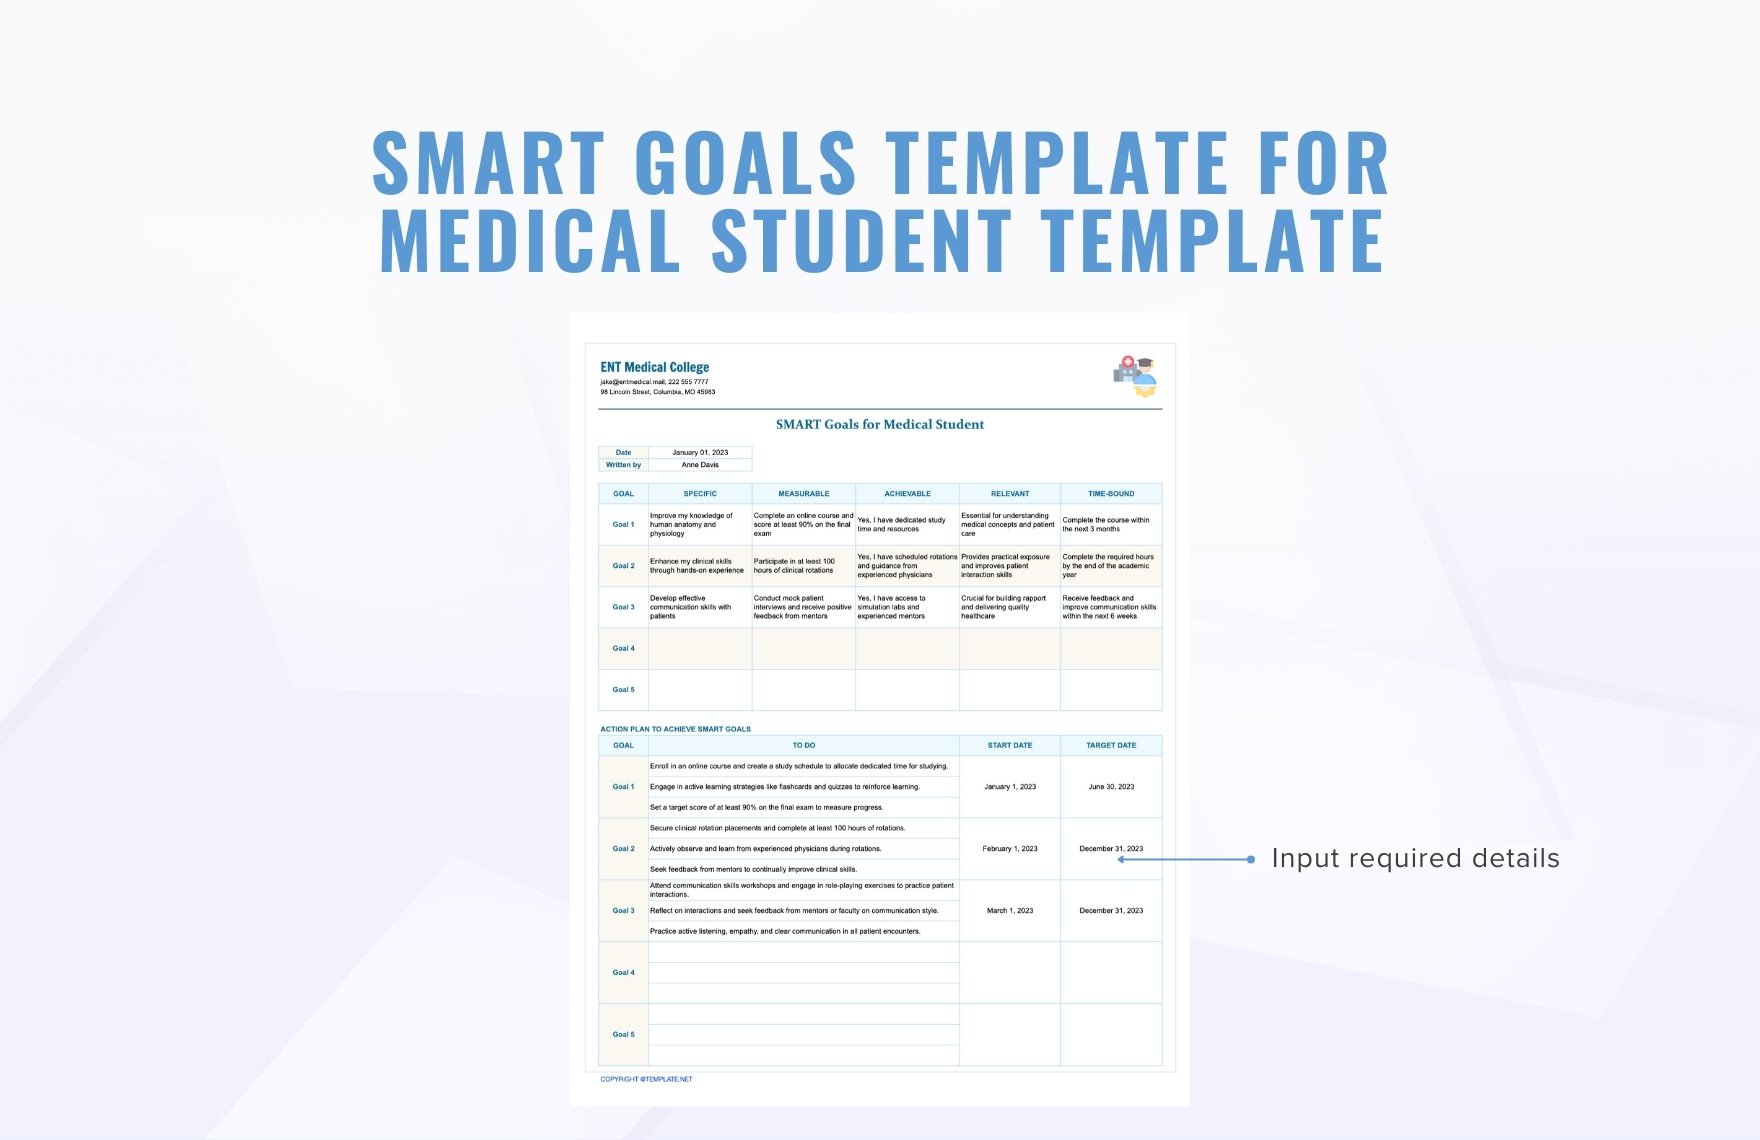 Smart Goals Template for Medical Students Template